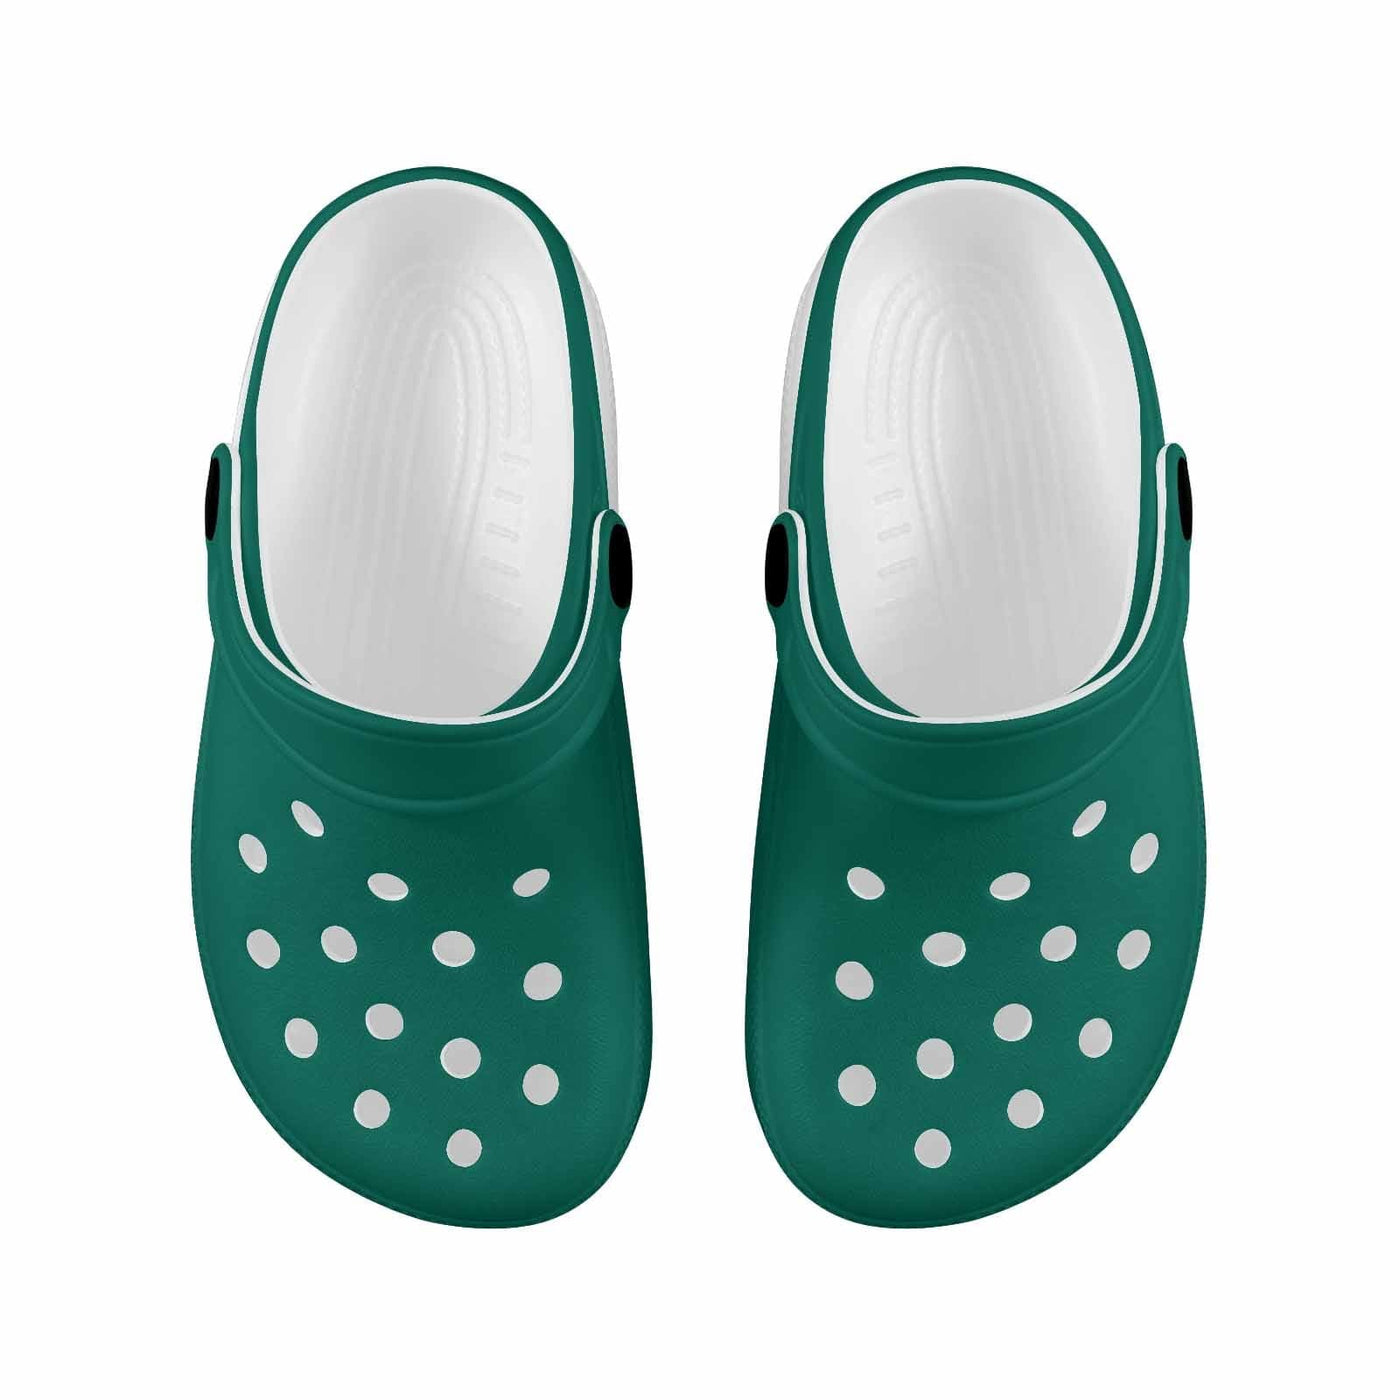 Teal Green Kids Clogs - Unisex | Clogs | Youth